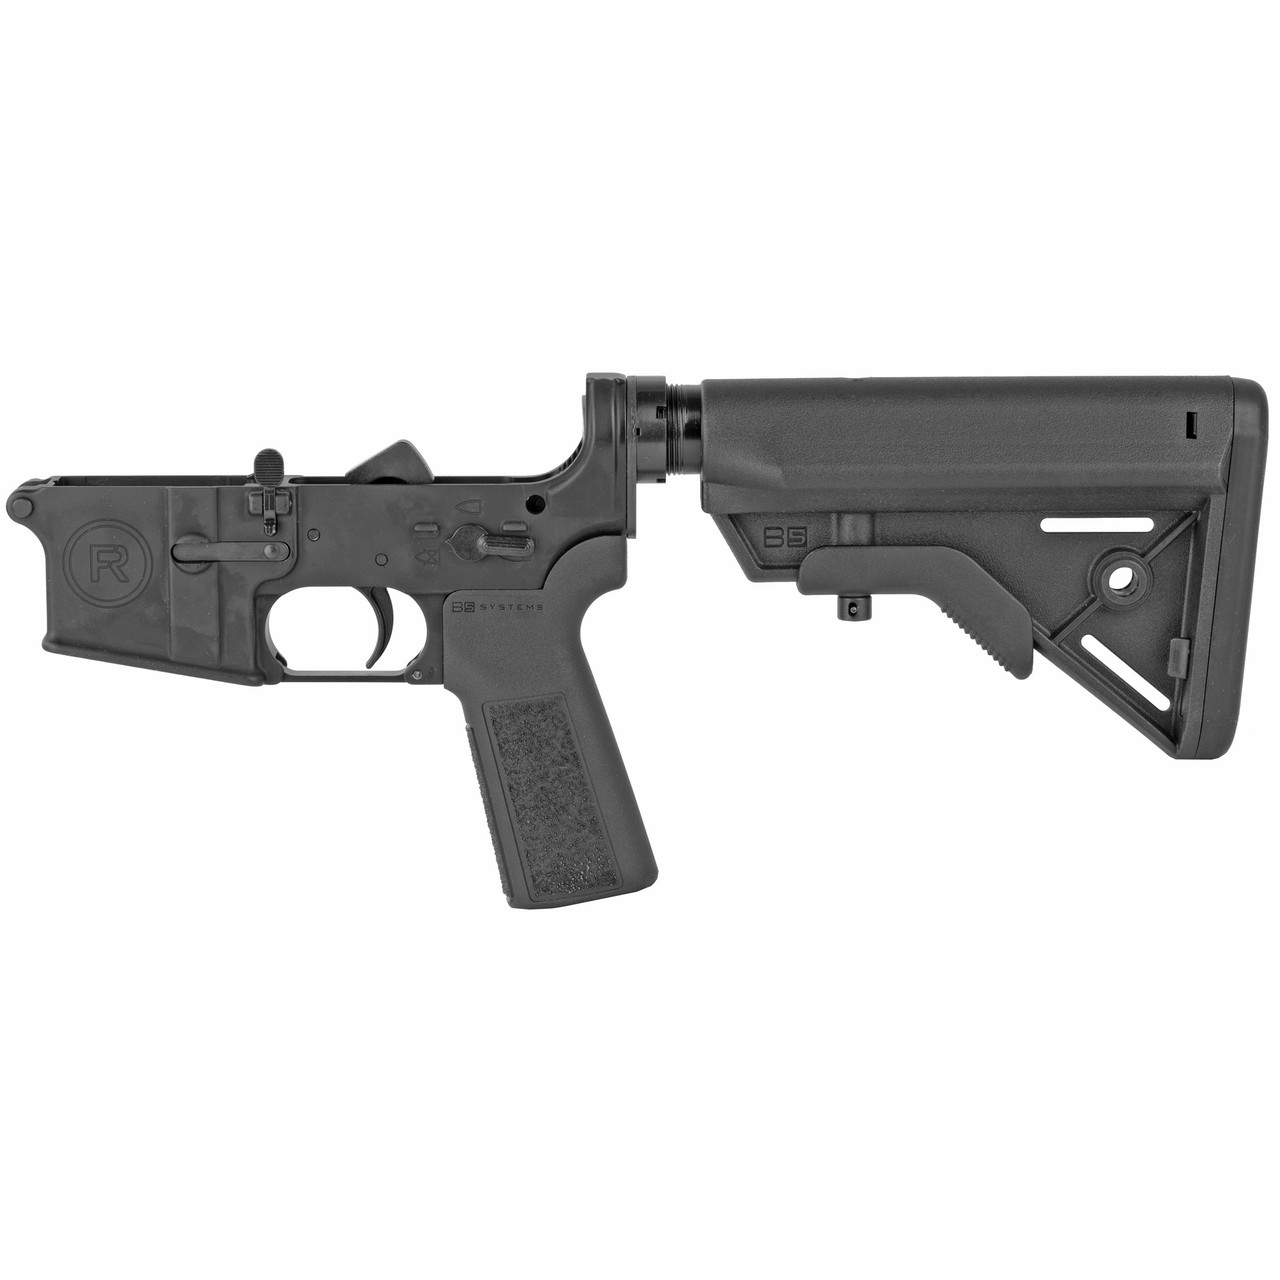 Radical Firearms Complete Lower Receiver w/B5 Furniture CALIFORNIA LEGAL - .223/5.56